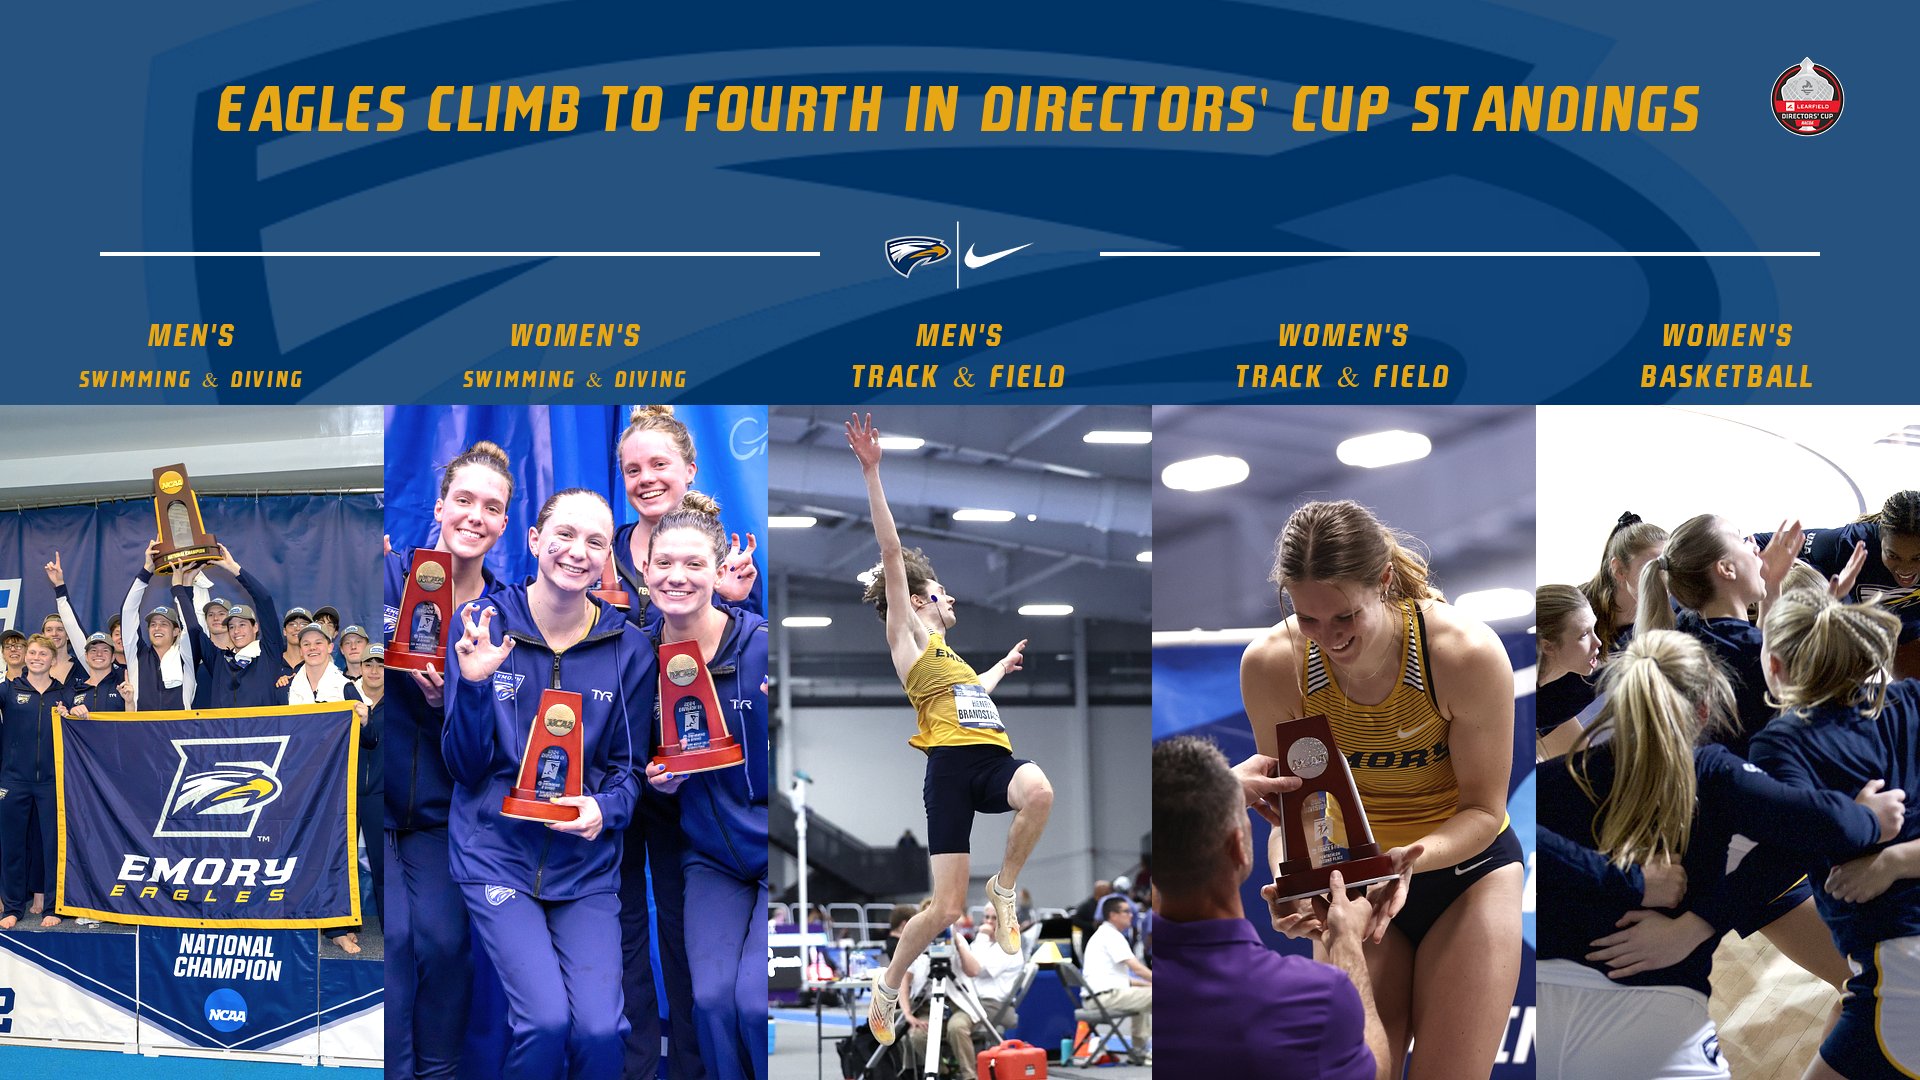 Eagles Rise to Fourth Overall in LEARFIELD Directors’ Cup Standings After Successful Winter